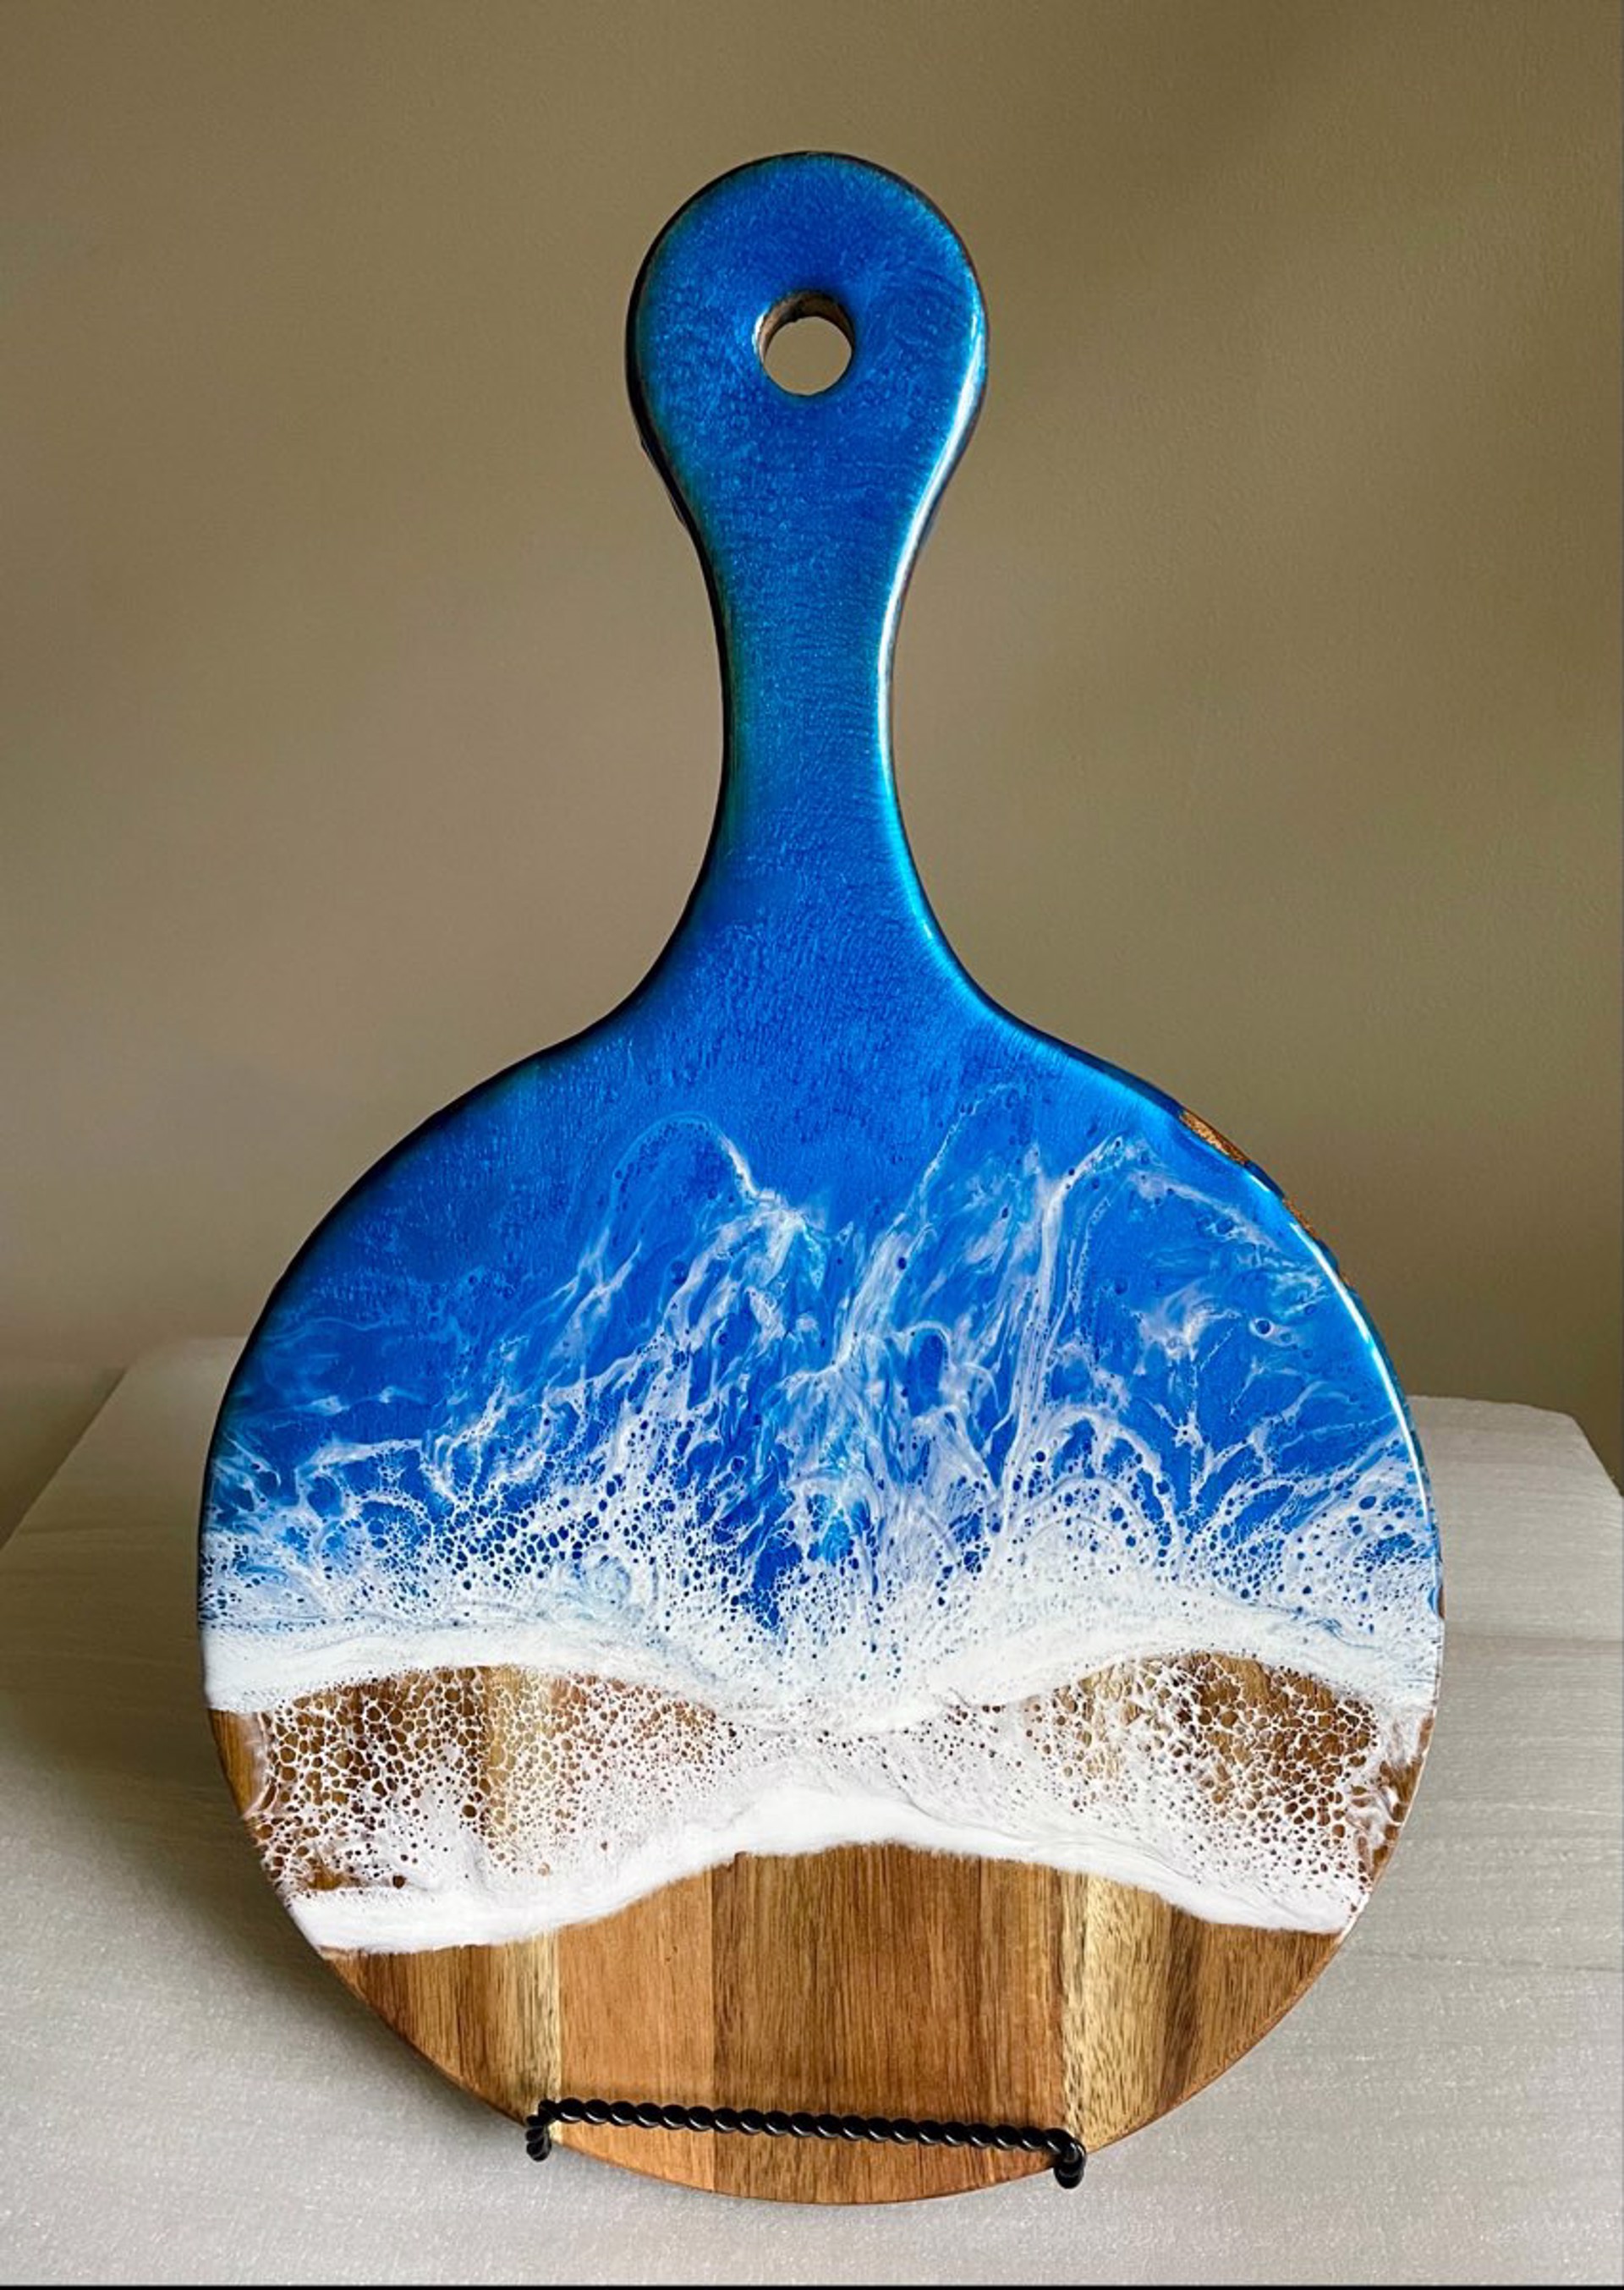 MDM22-25 Round Blue Resin and Wood Charcuterie Board by Mary Duke McCartt